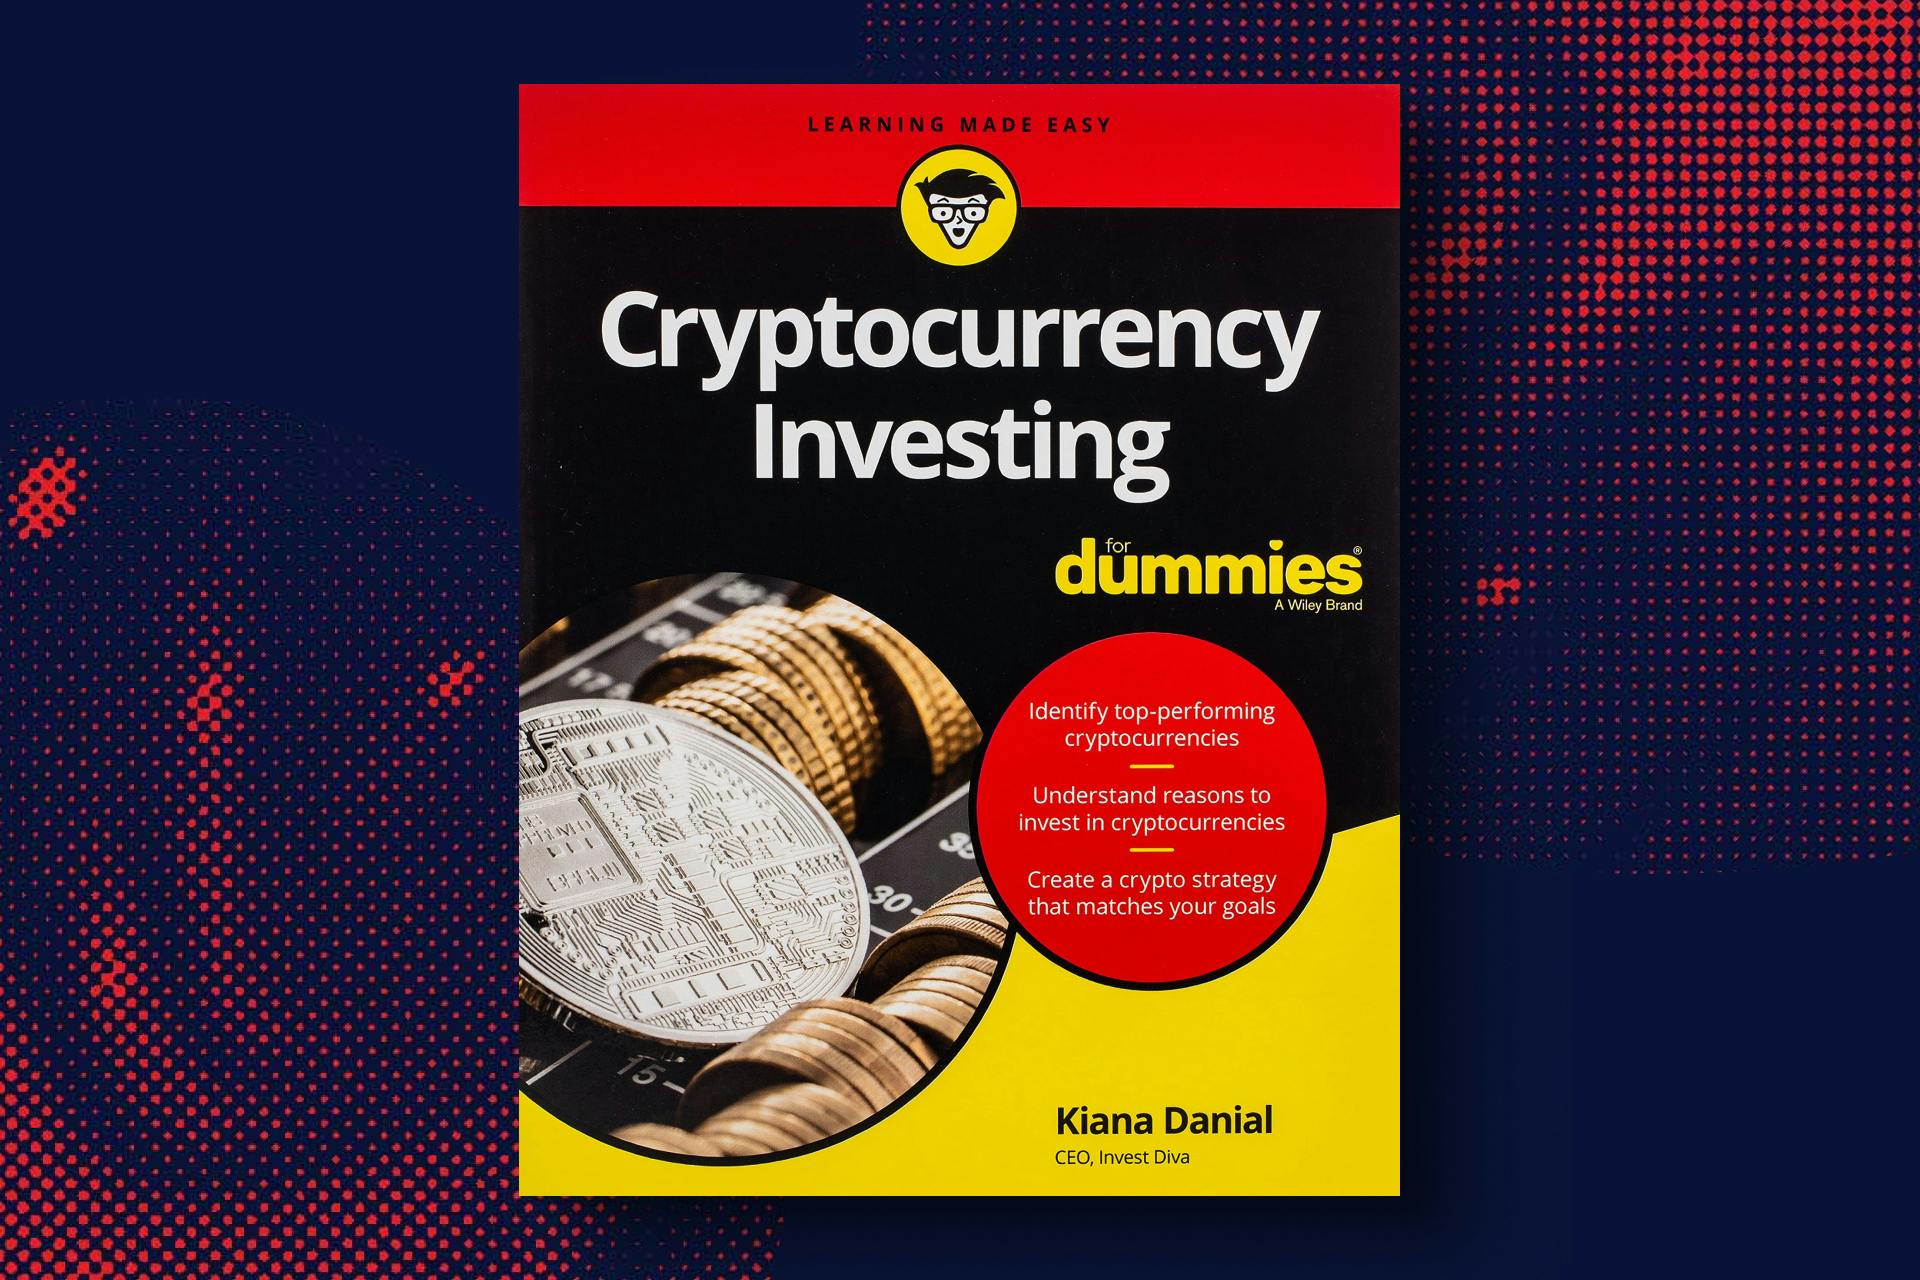 crytocurrency for dummies